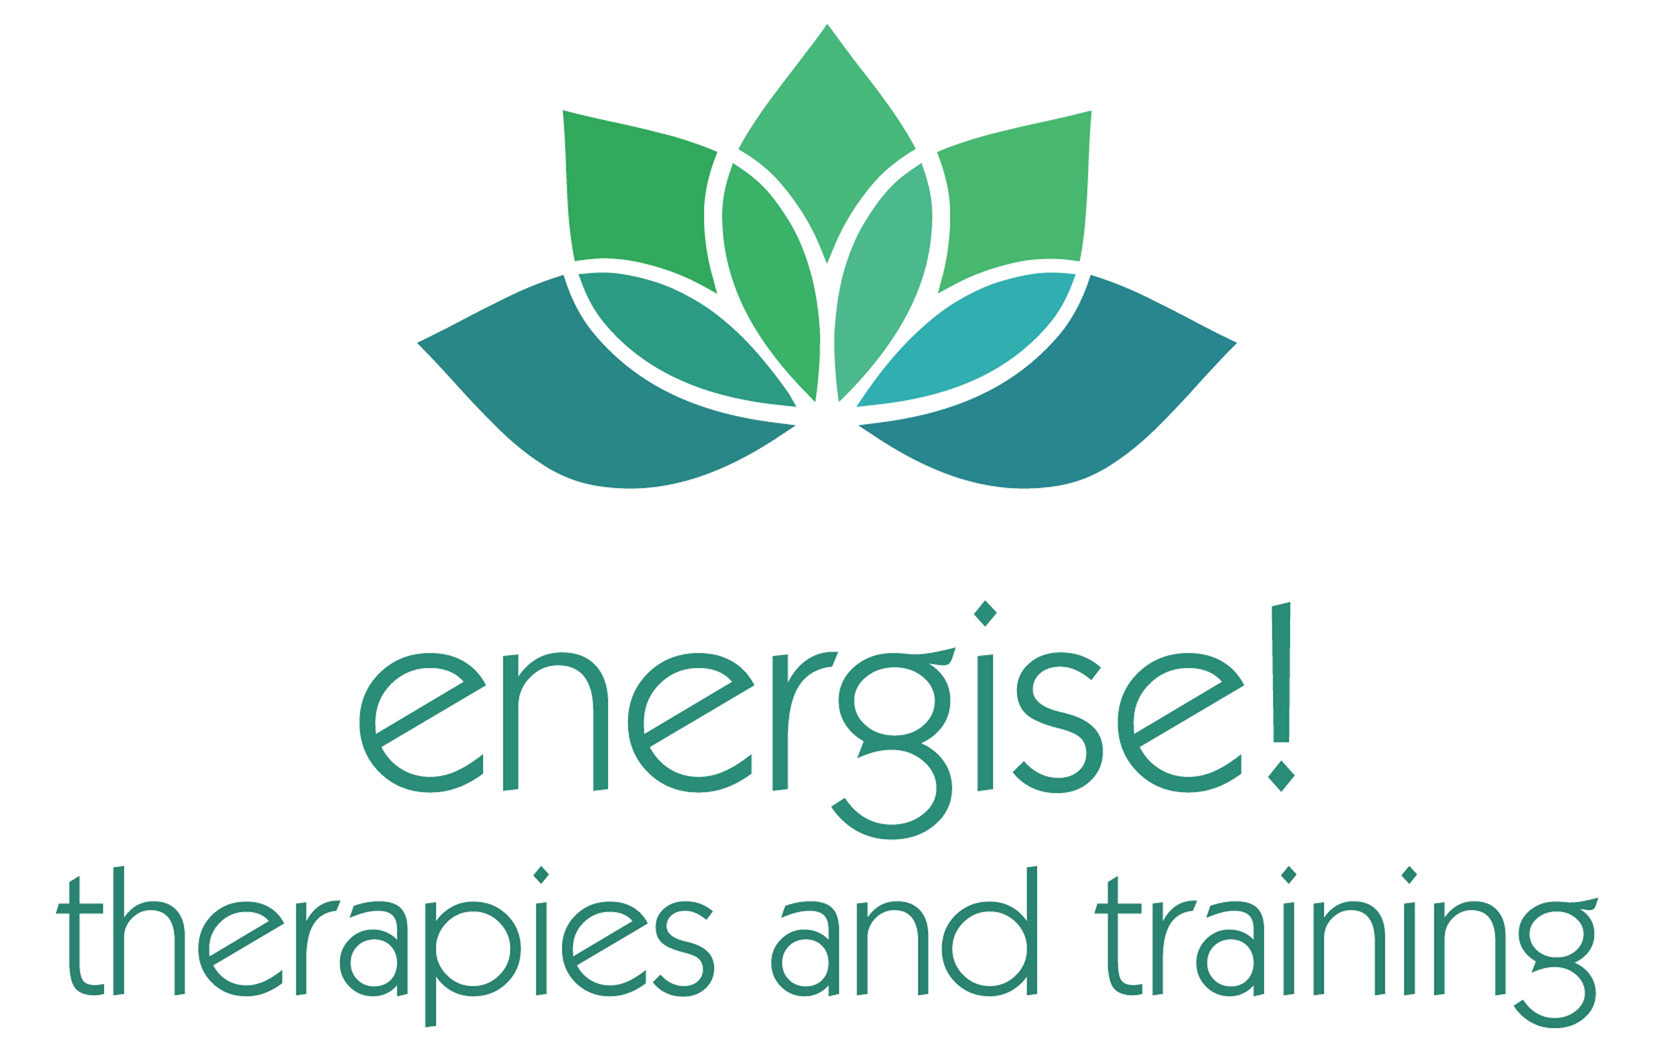 energise!  therapies and training